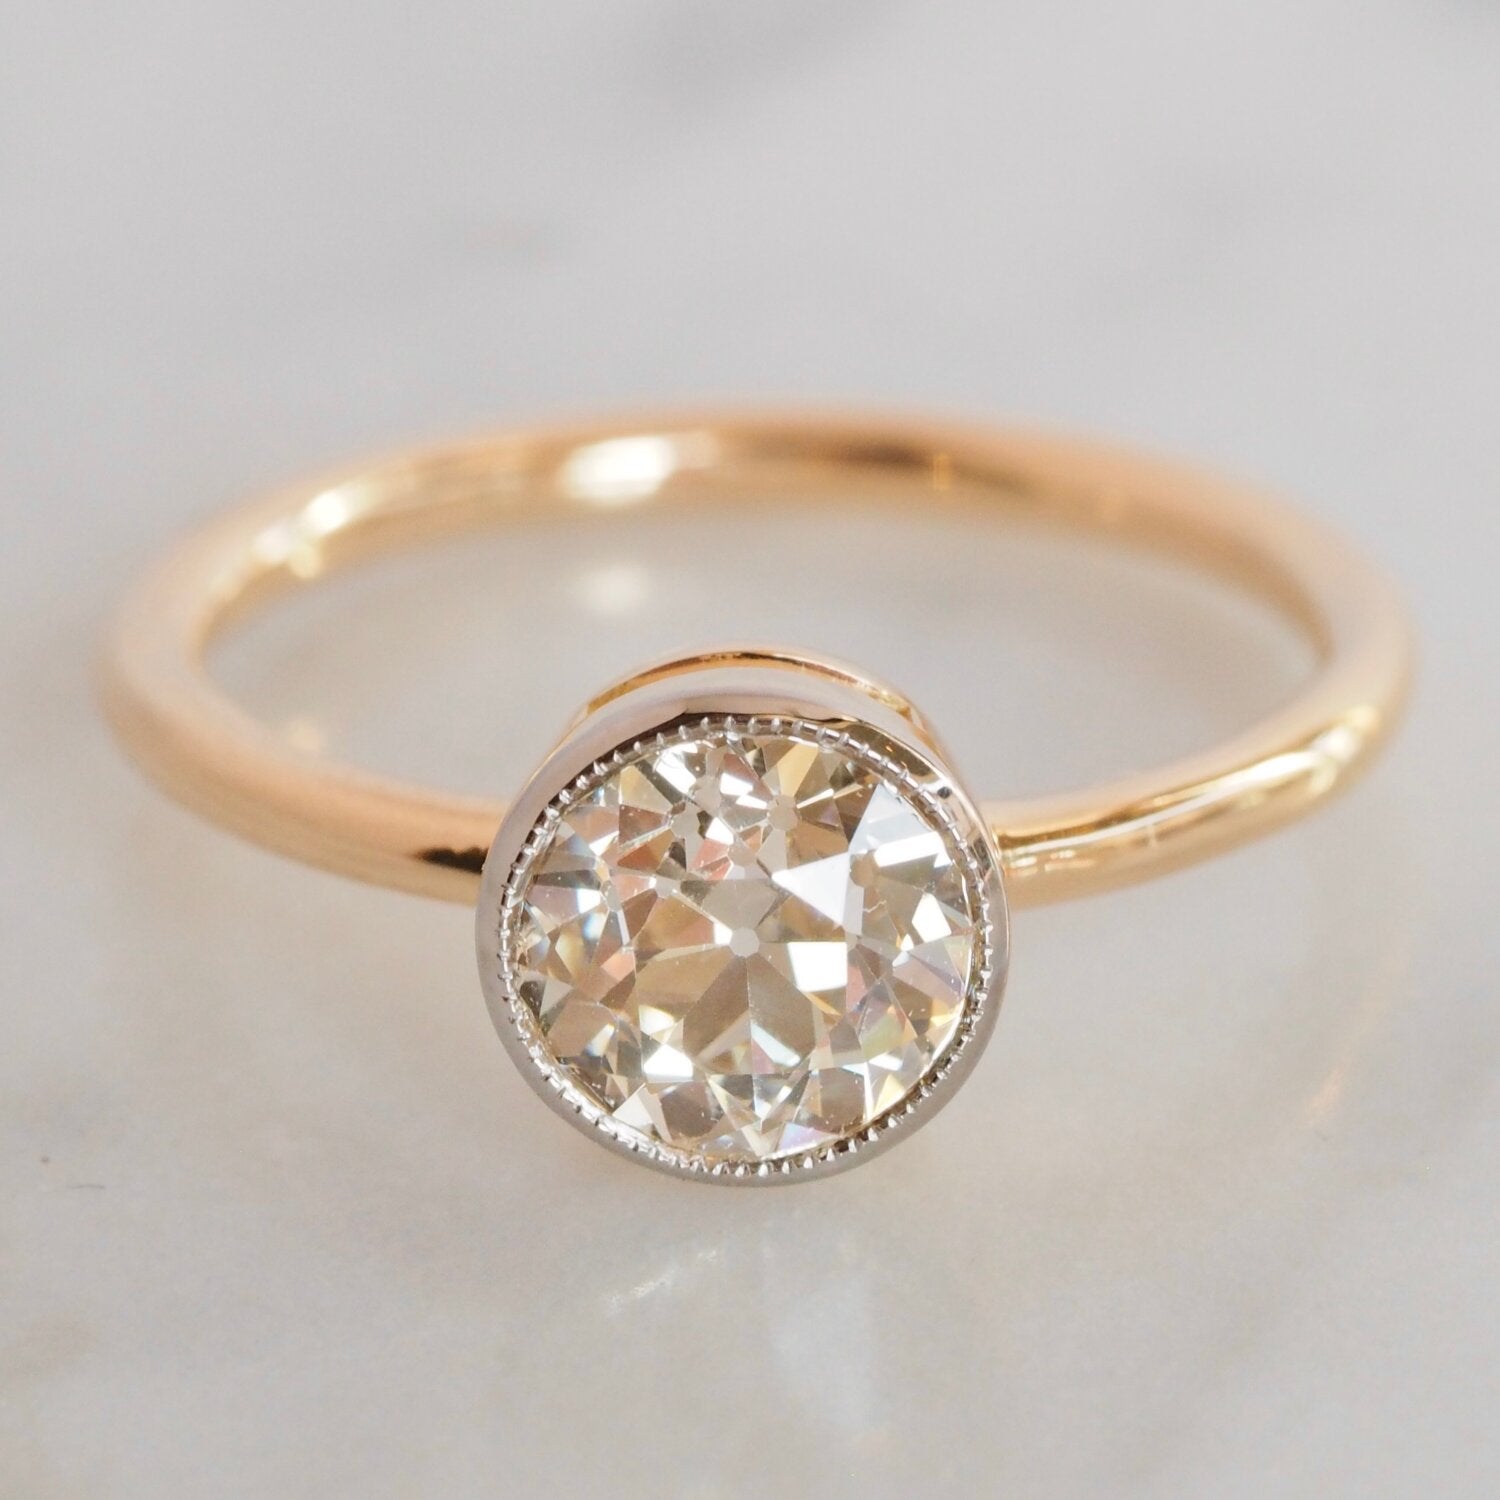 18k Gold Engagement Ring with Antique Old European Cut Diamond